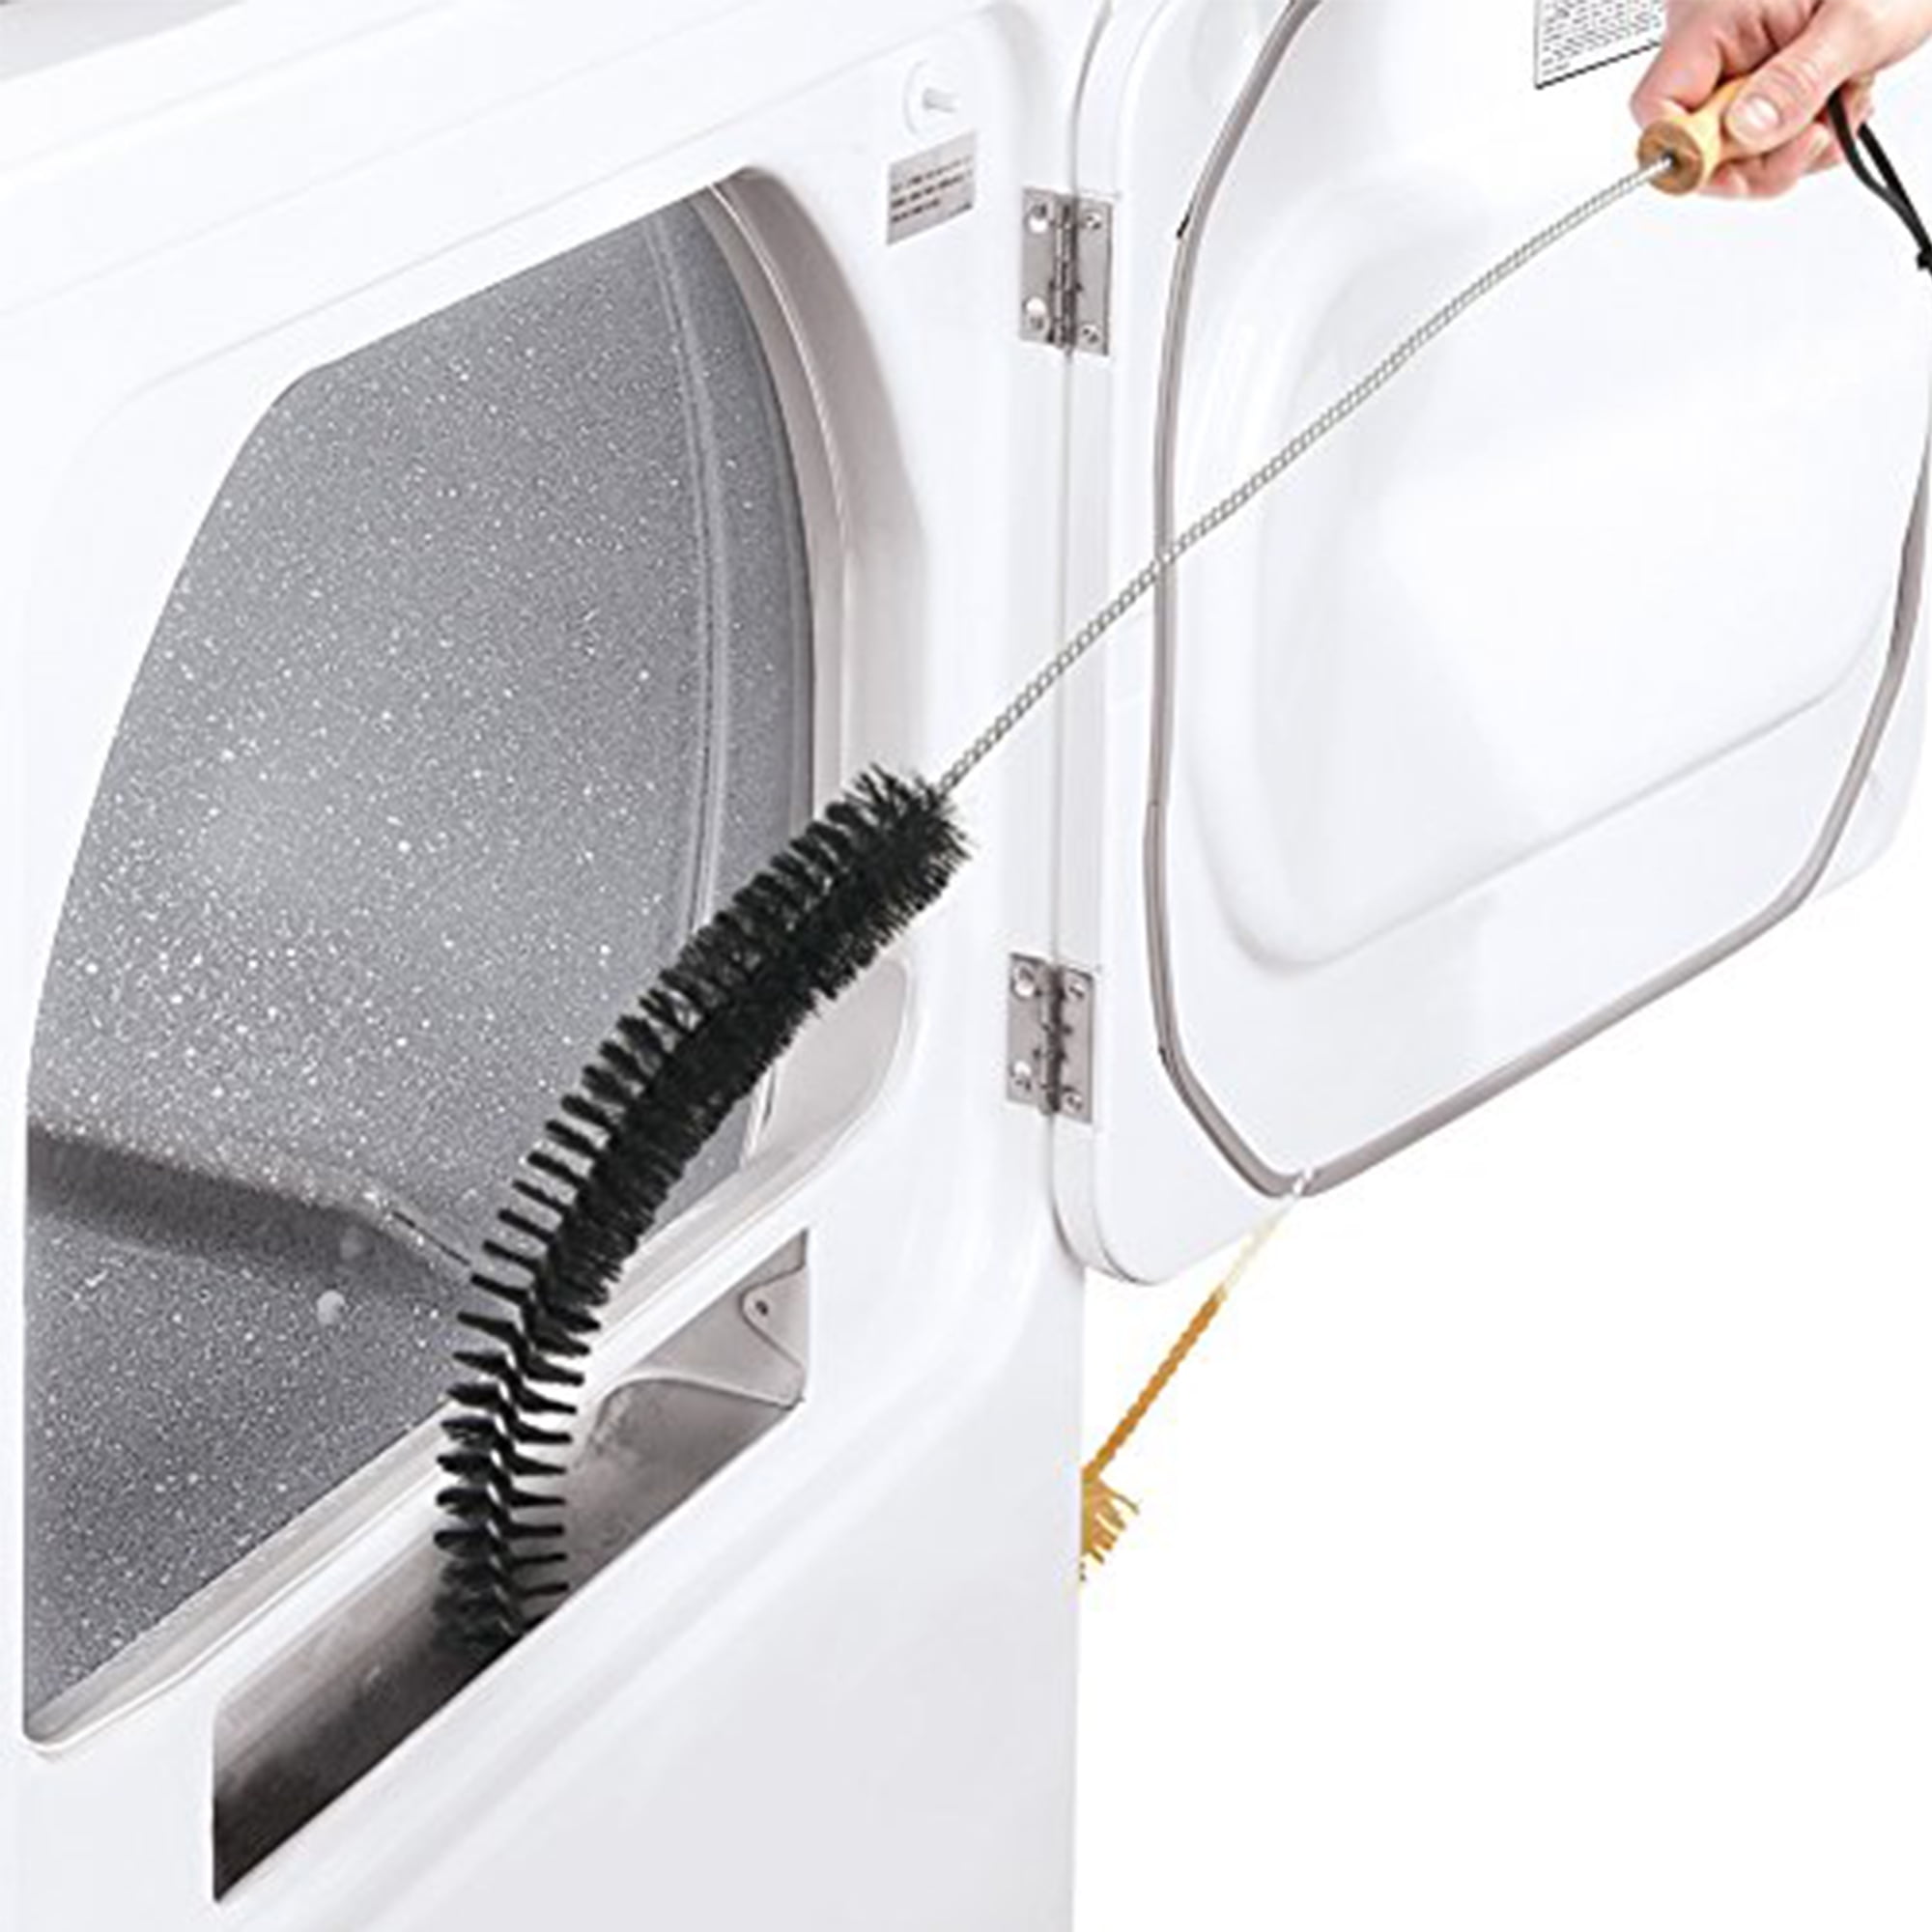 Pudcoco Clothes Dryer Lint Vent Trap Cleaner Brush Gas Electric Fire Prevention Bottle Walmart